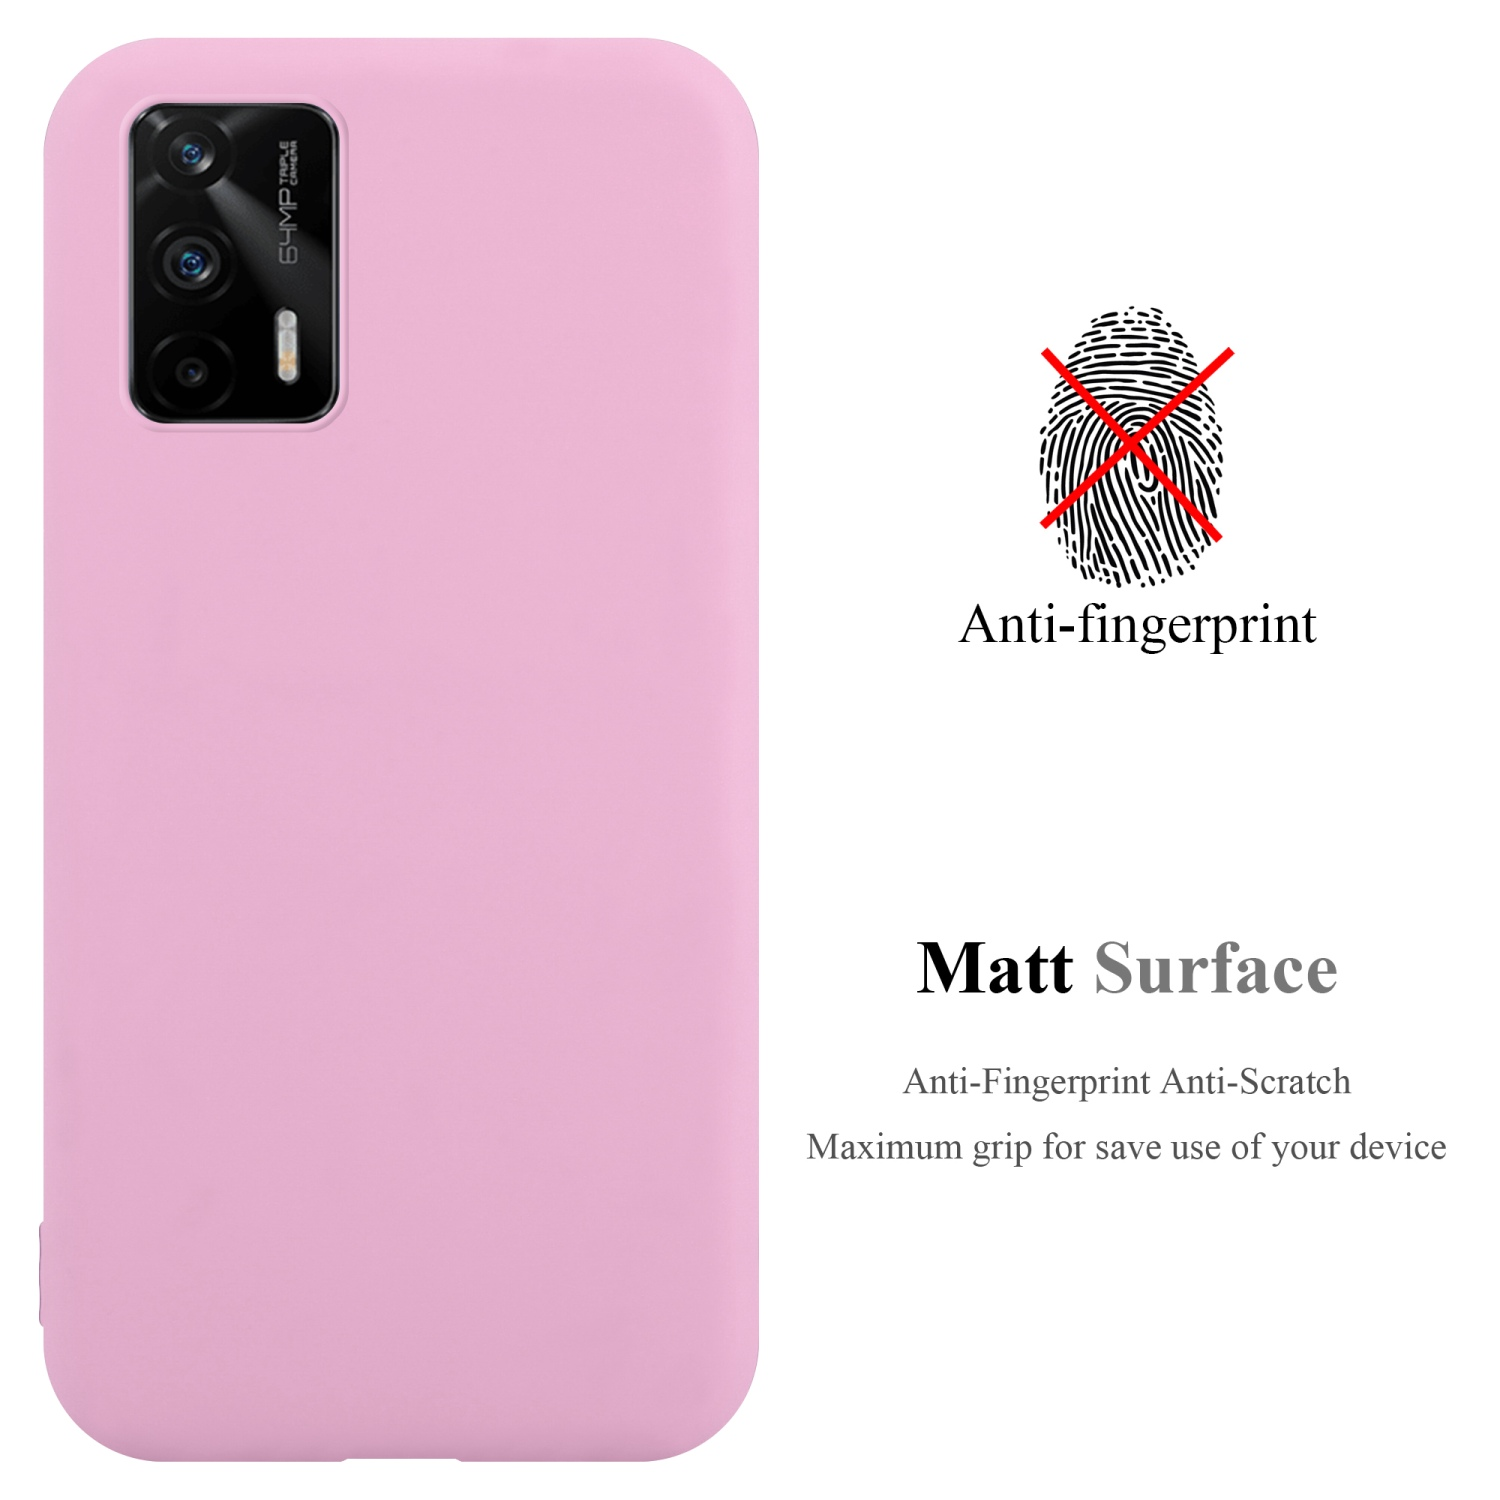 PRO, / / GT Realme, 2T GT ROSA Backcover, Style, Q3 Hülle Neo CADORABO im Candy CANDY TPU